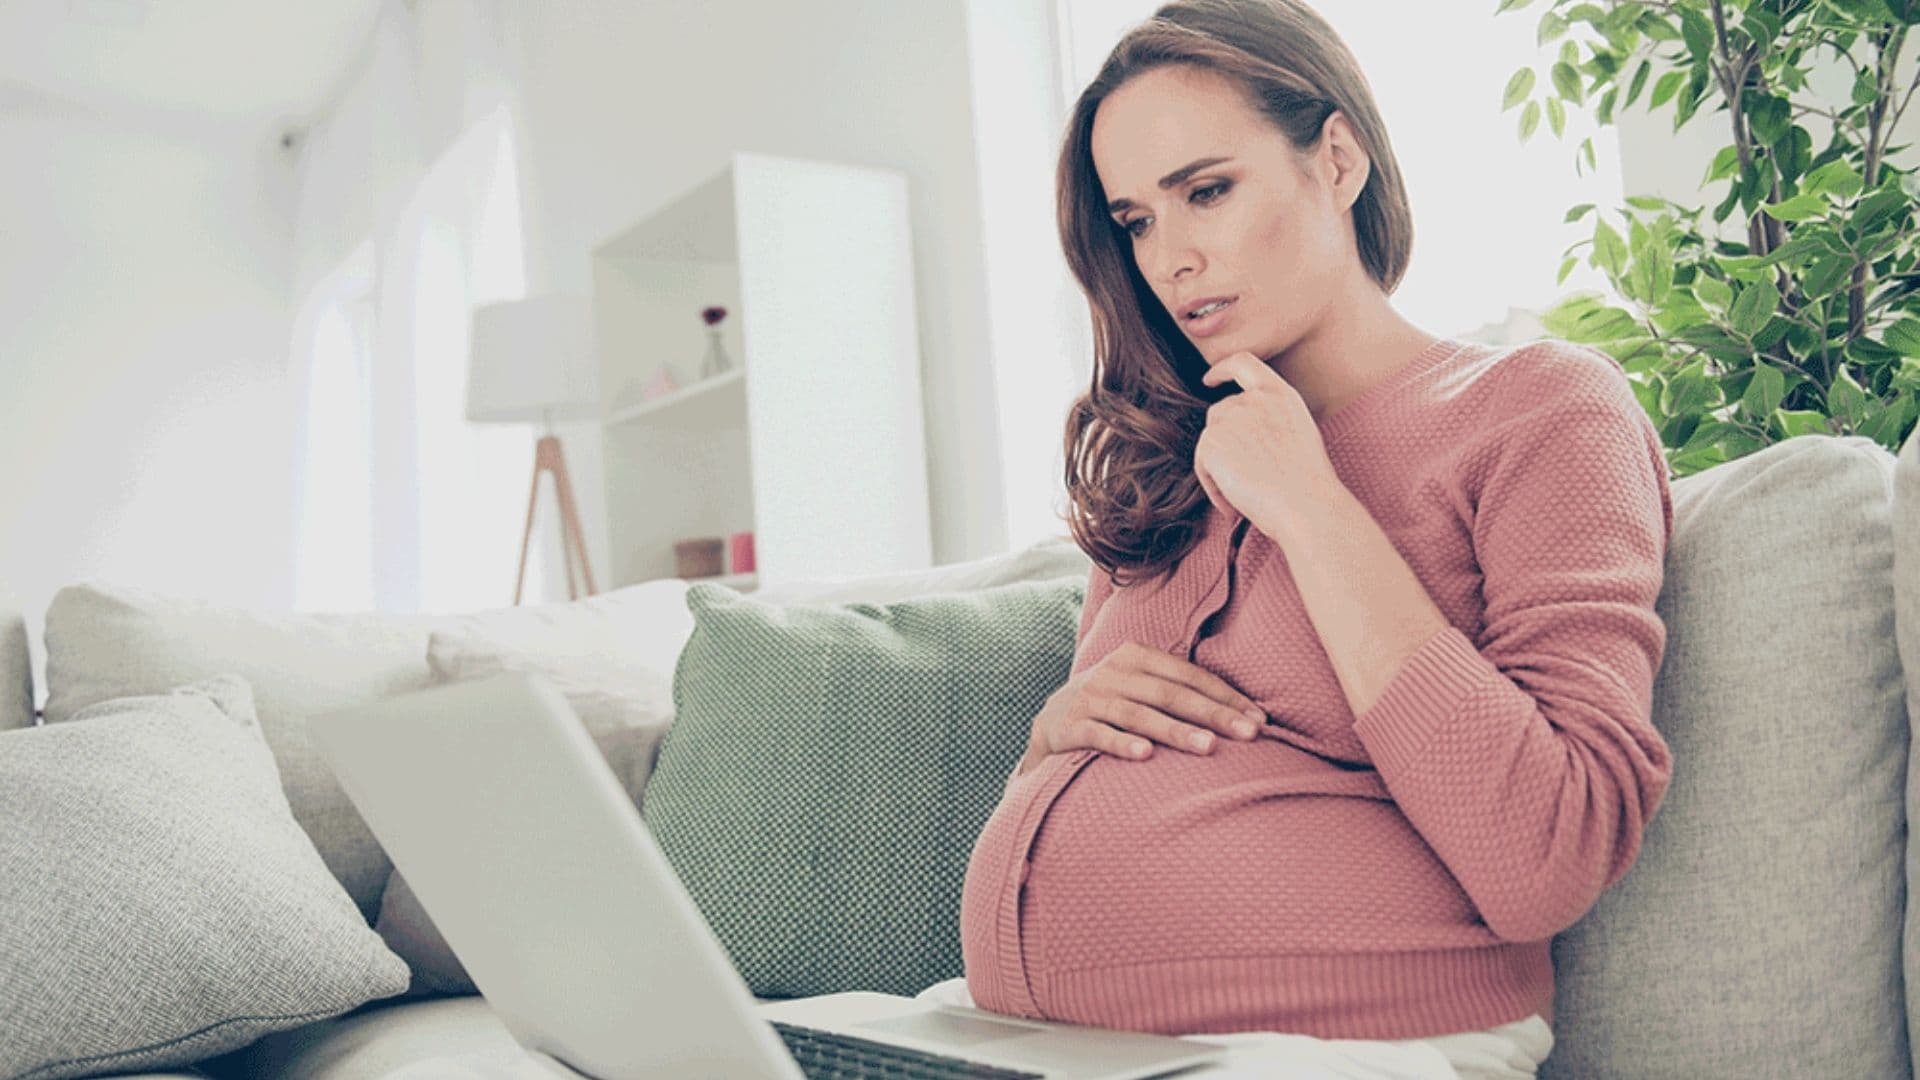 How Long Does Maternity Leave Last in New Jersey?